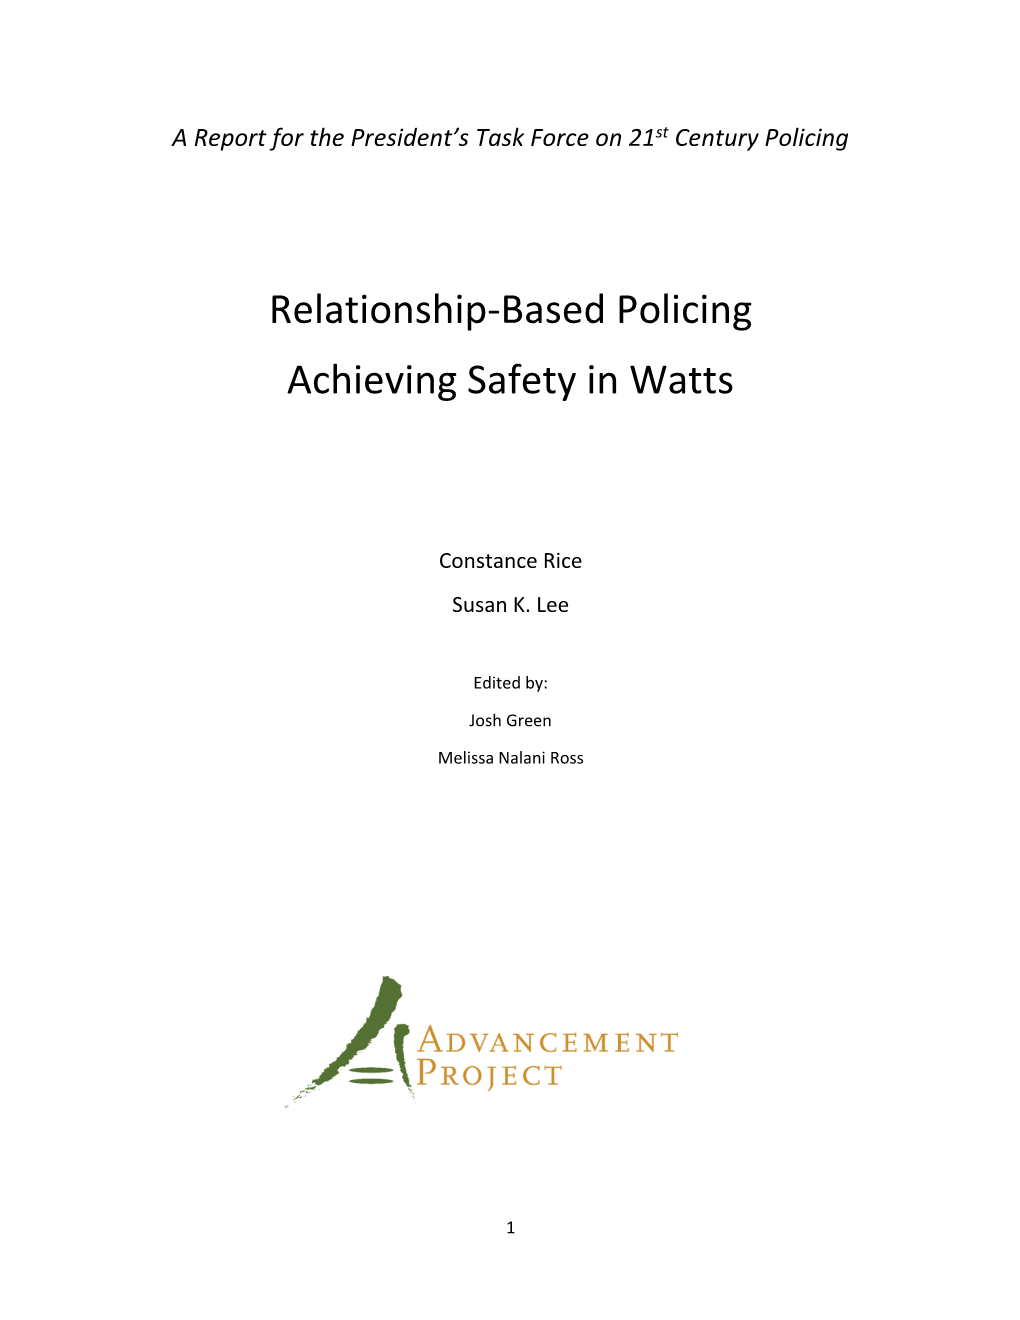 Relationship-Based Policing Achieving Safety in Watts